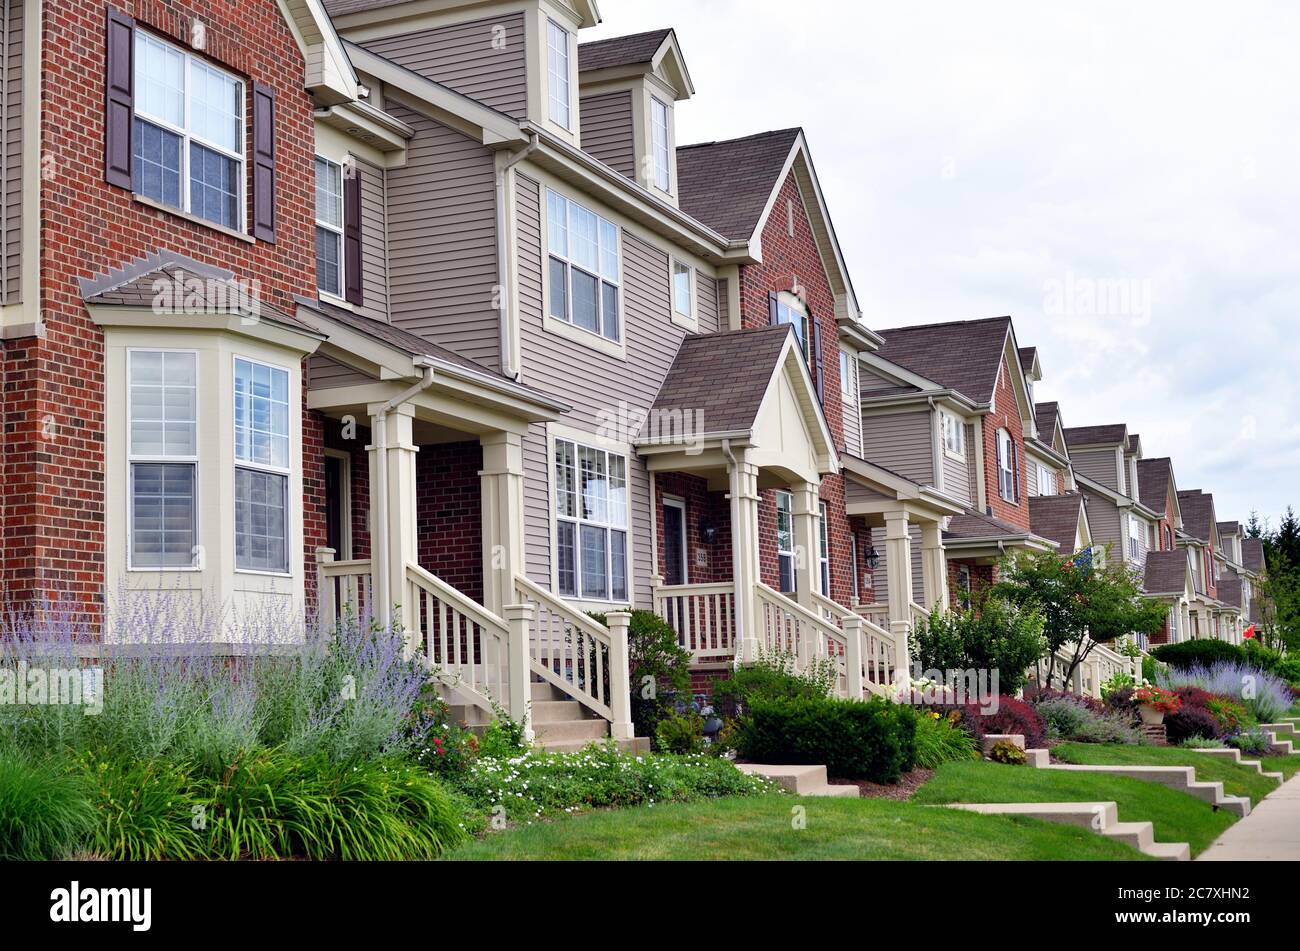 Bartlett, Illinois, USA. A residential block of townhouses in the suburban Chicago community of Bartlett, Illinois.. Stock Photo